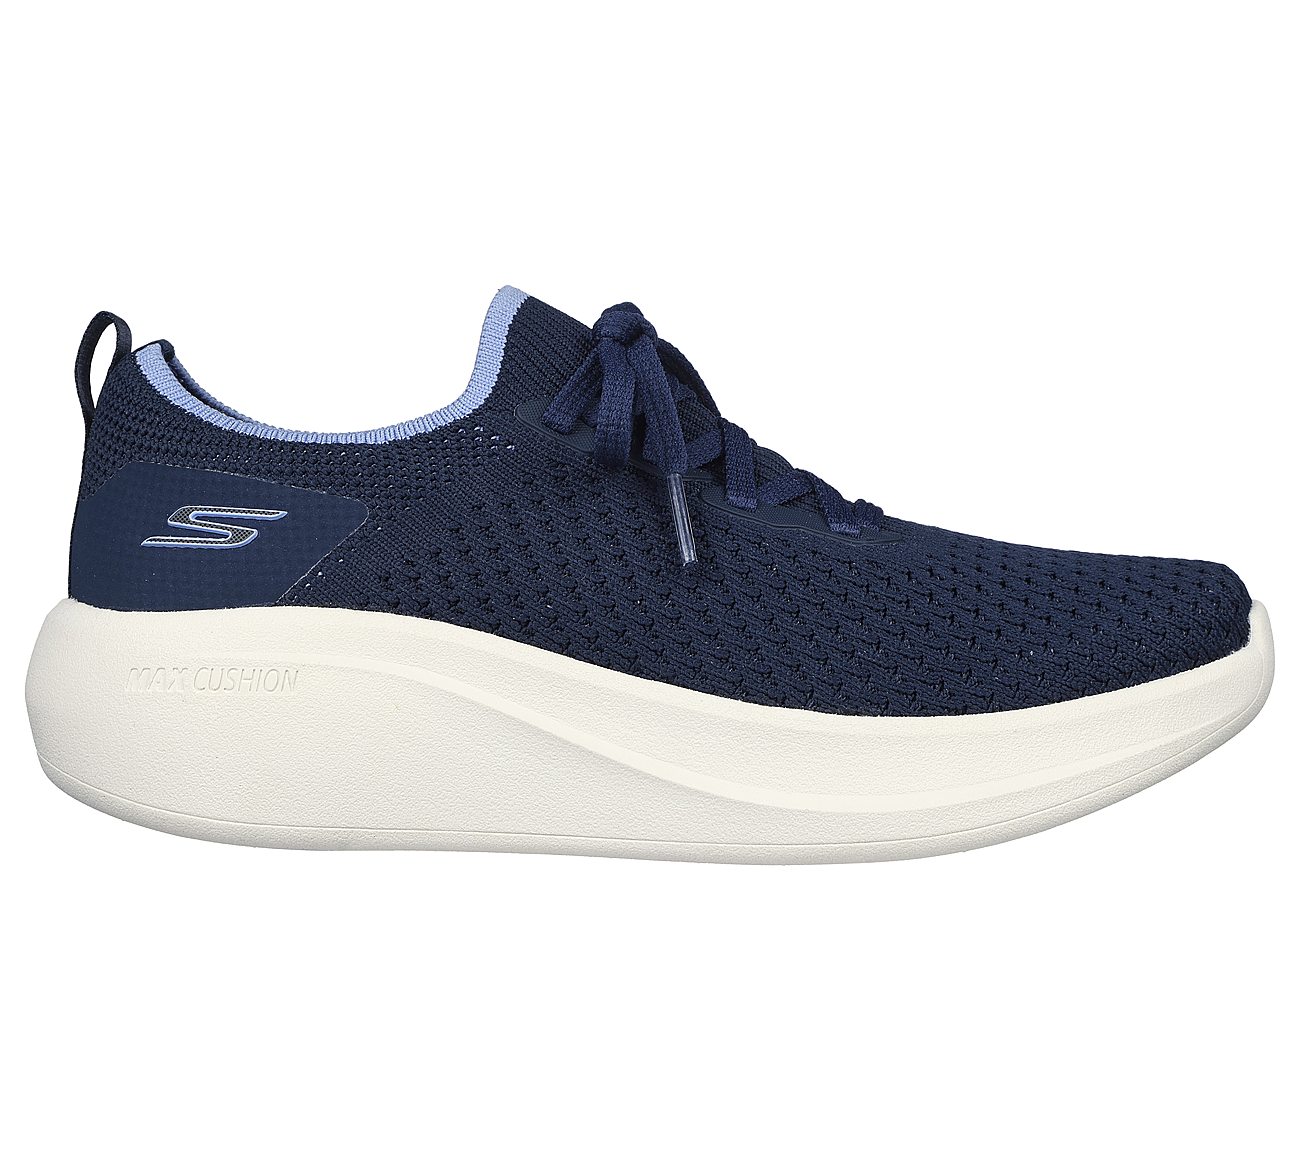 MAX CUSHIONING ESSENTIAL - JU, NAVY/LAVENDER Footwear Lateral View